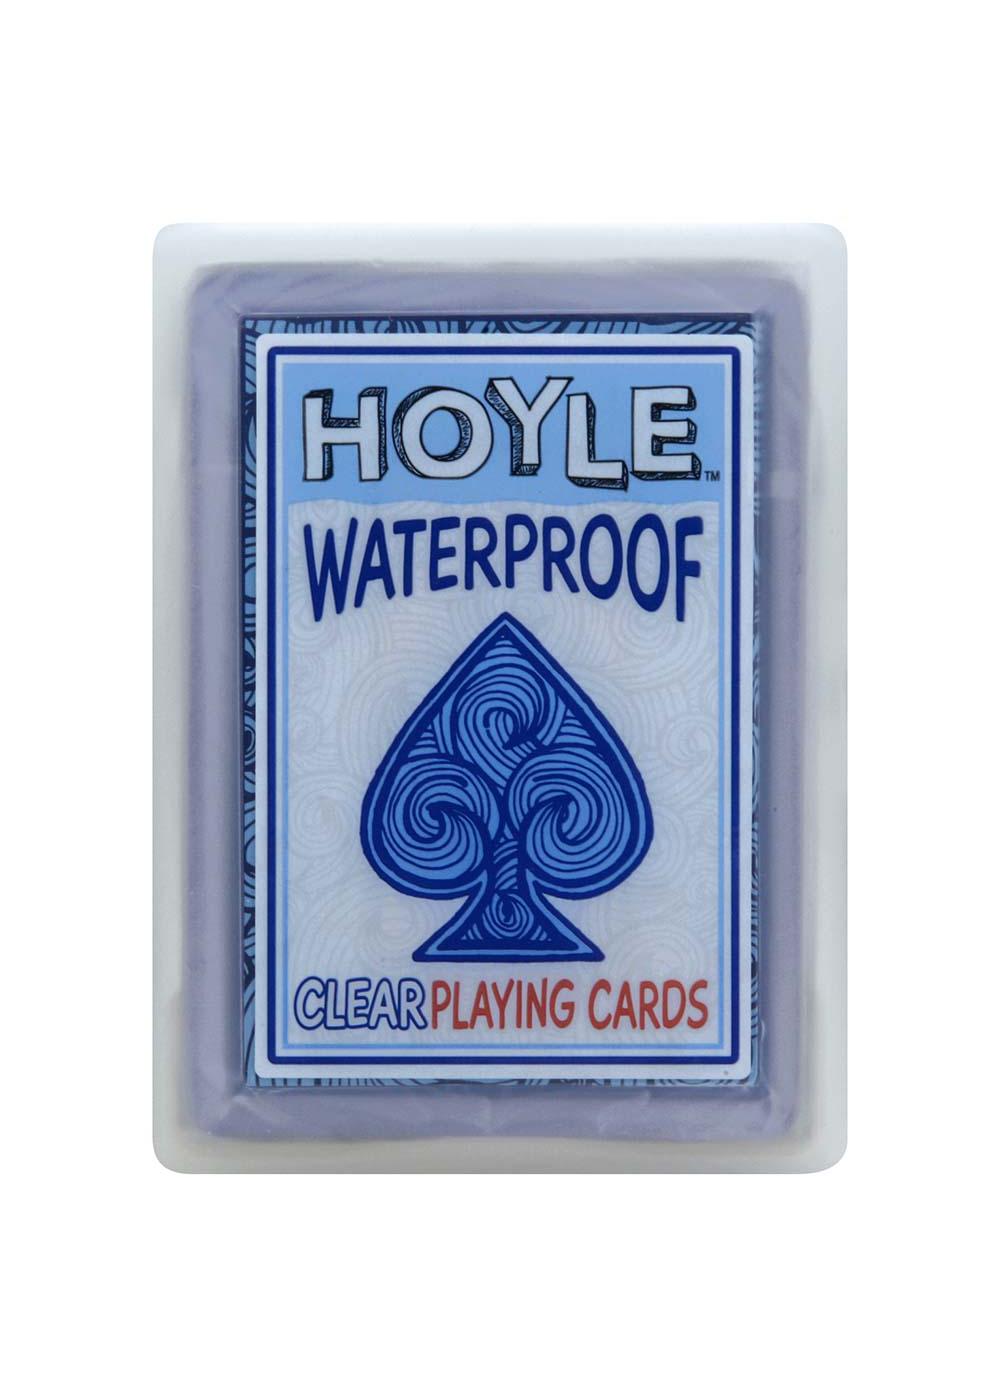 Hoyle Waterproof Clear Playing Cards; image 1 of 2